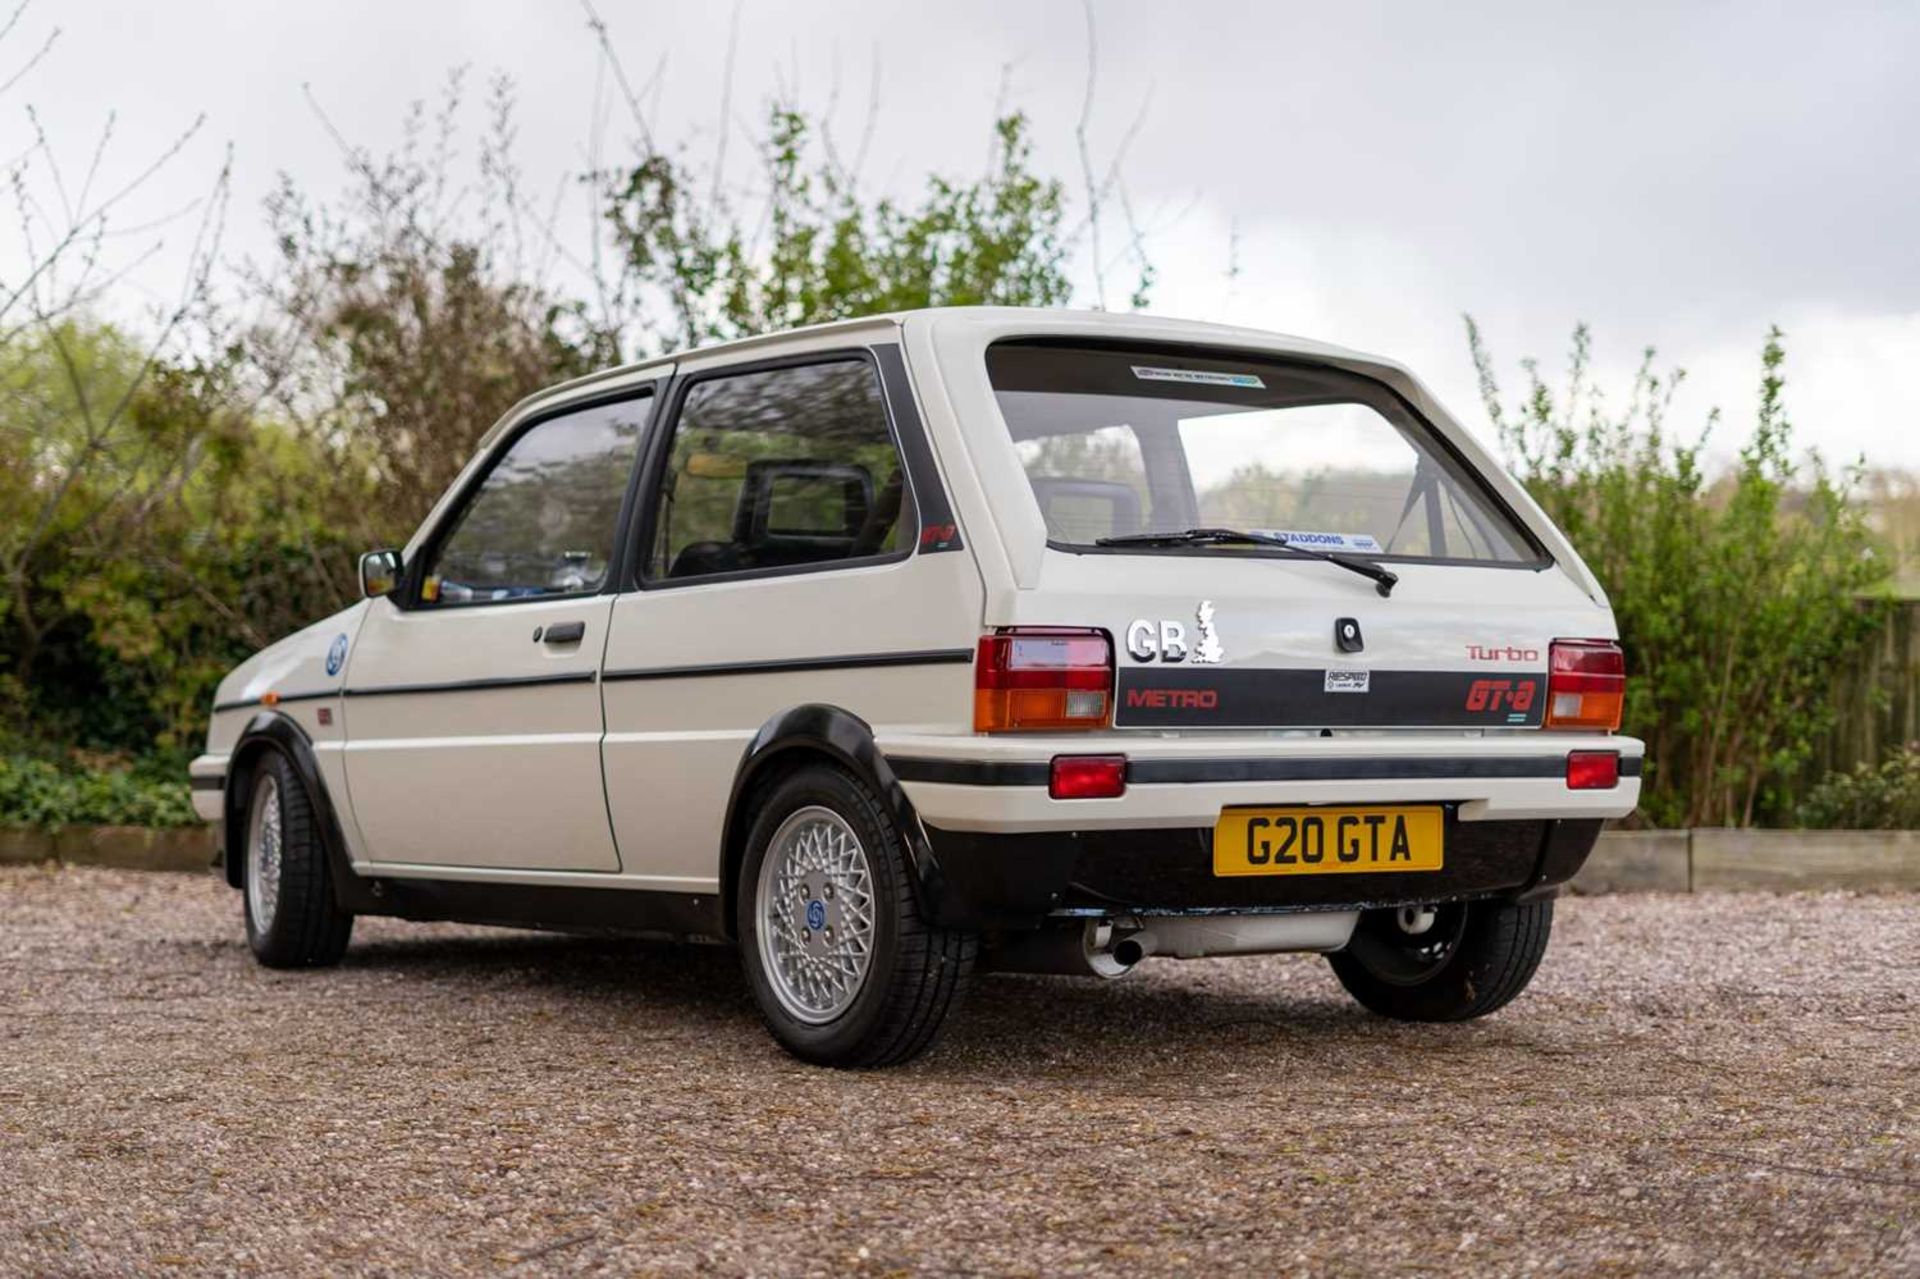 1989 Austin Metro GTa  Offered with the registration ‘G20 GTA’ and a fresh MOT - Image 3 of 53